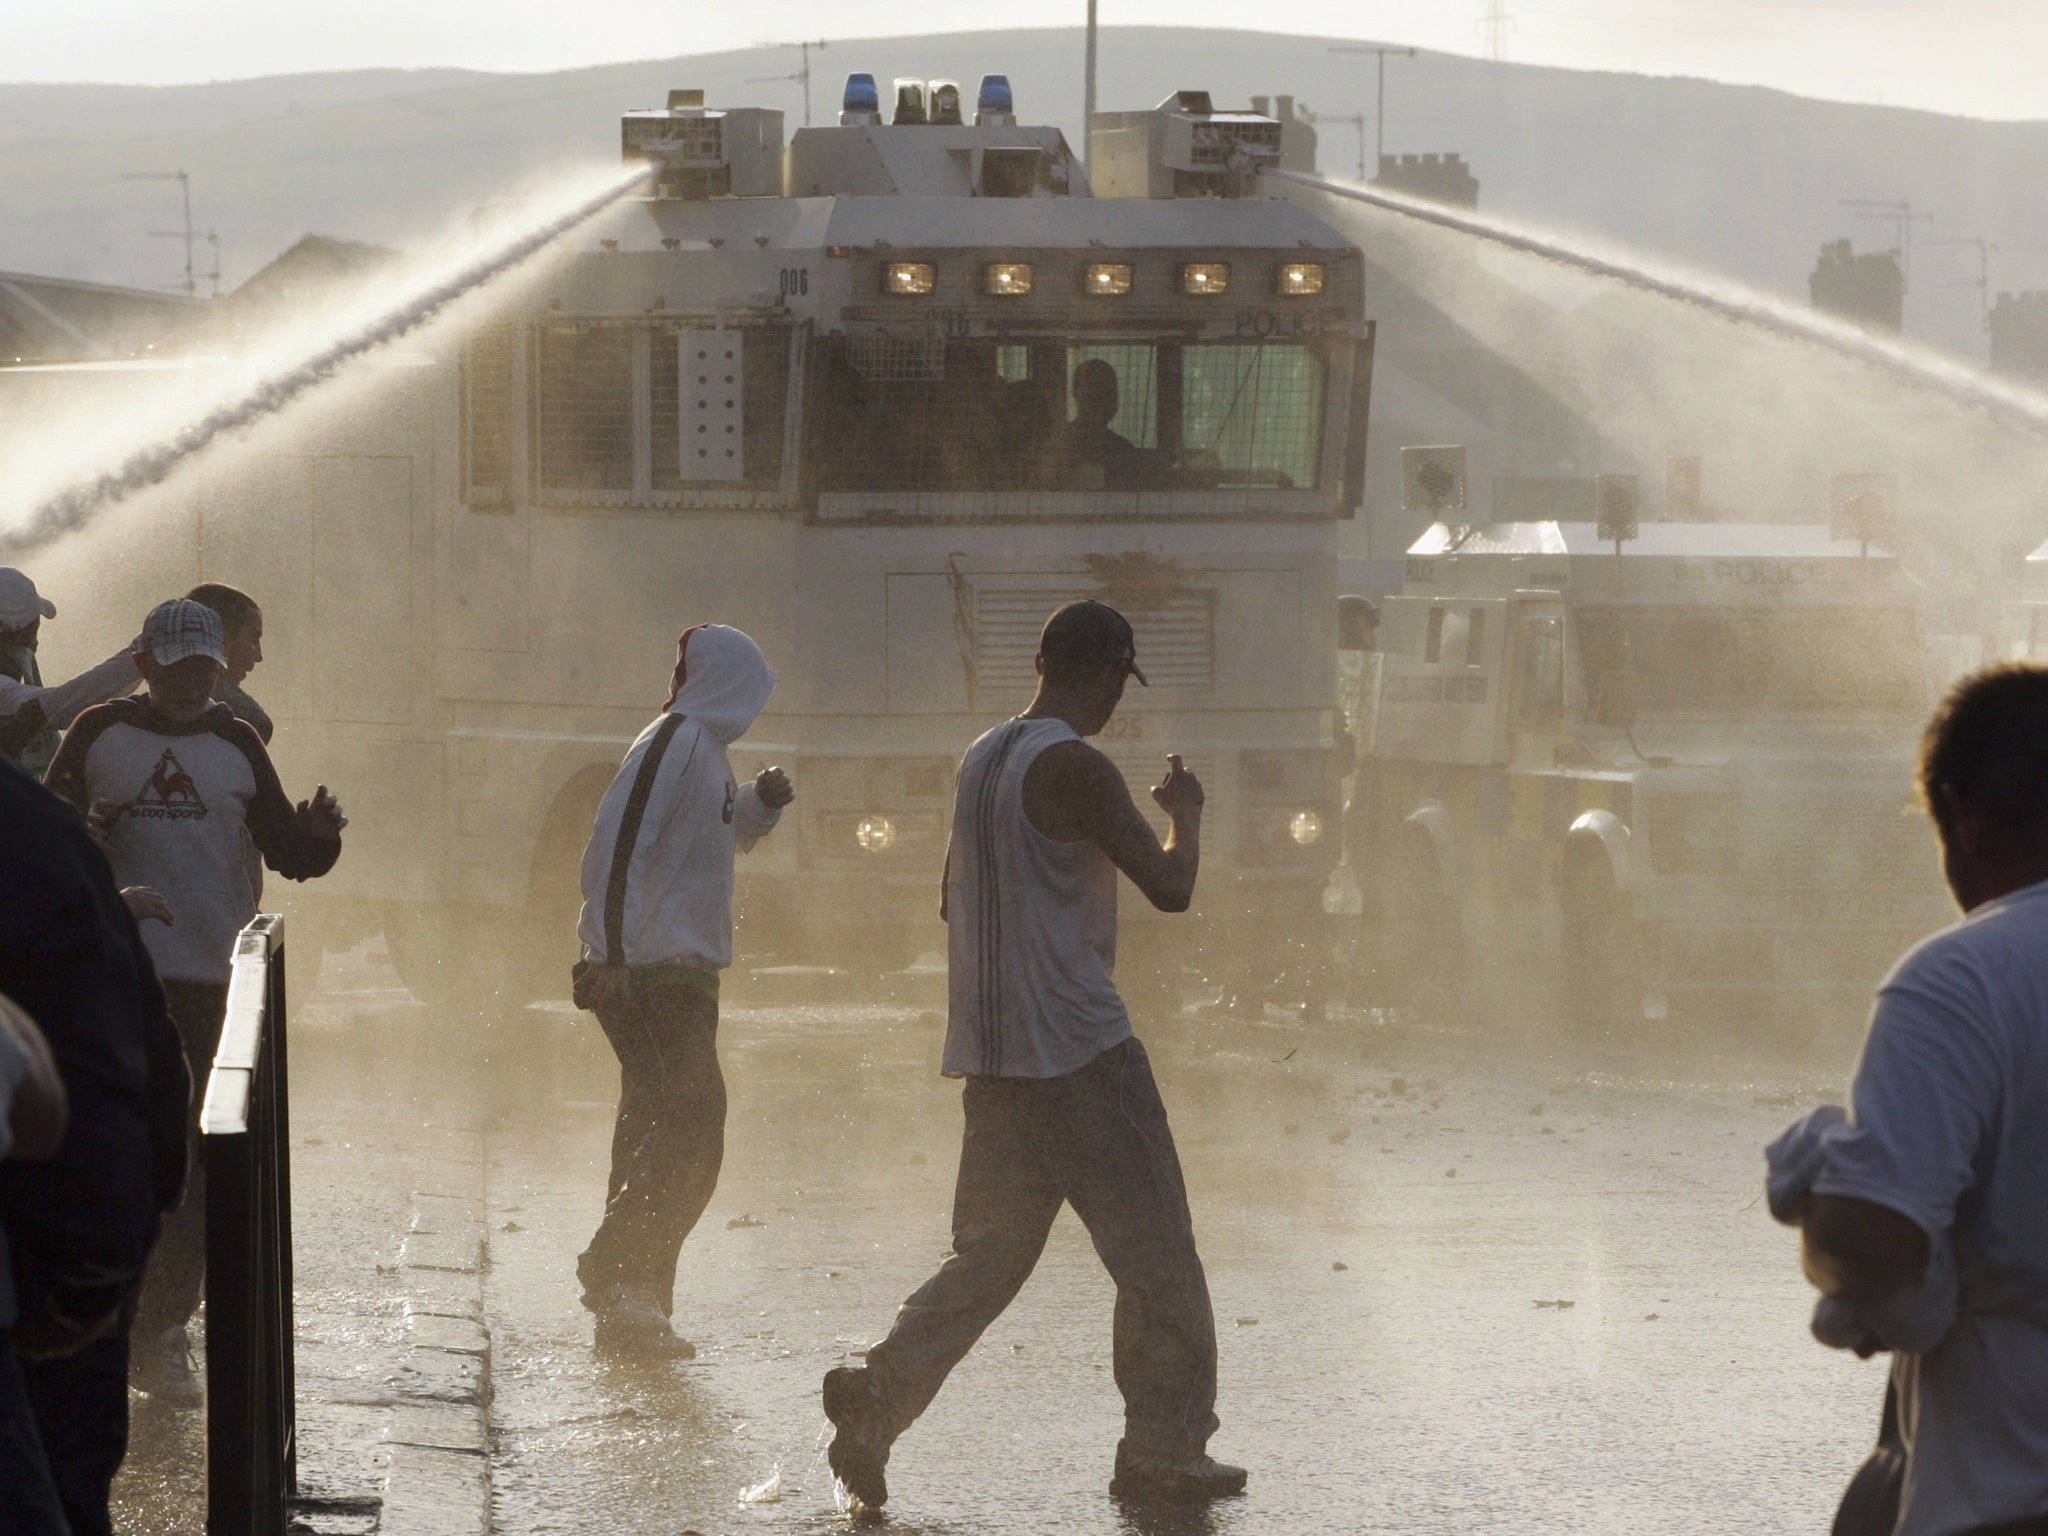 PSNI (Police Service of Northern Ireland) use a water cannon during riots on the Crumlin Road in 2005 in north Belfast